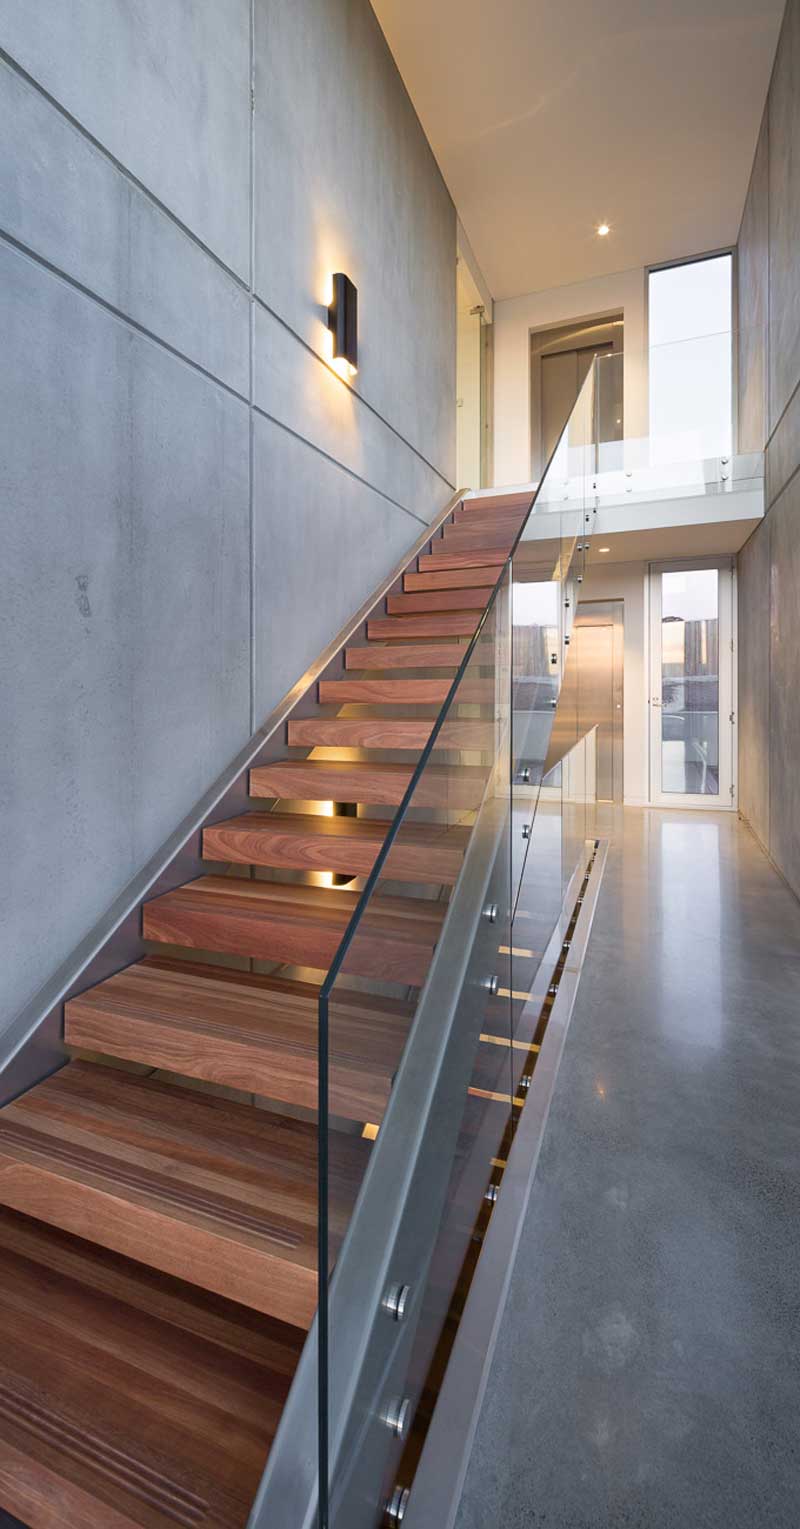 View of internal stair with feature jarrah treads and glass balustrade